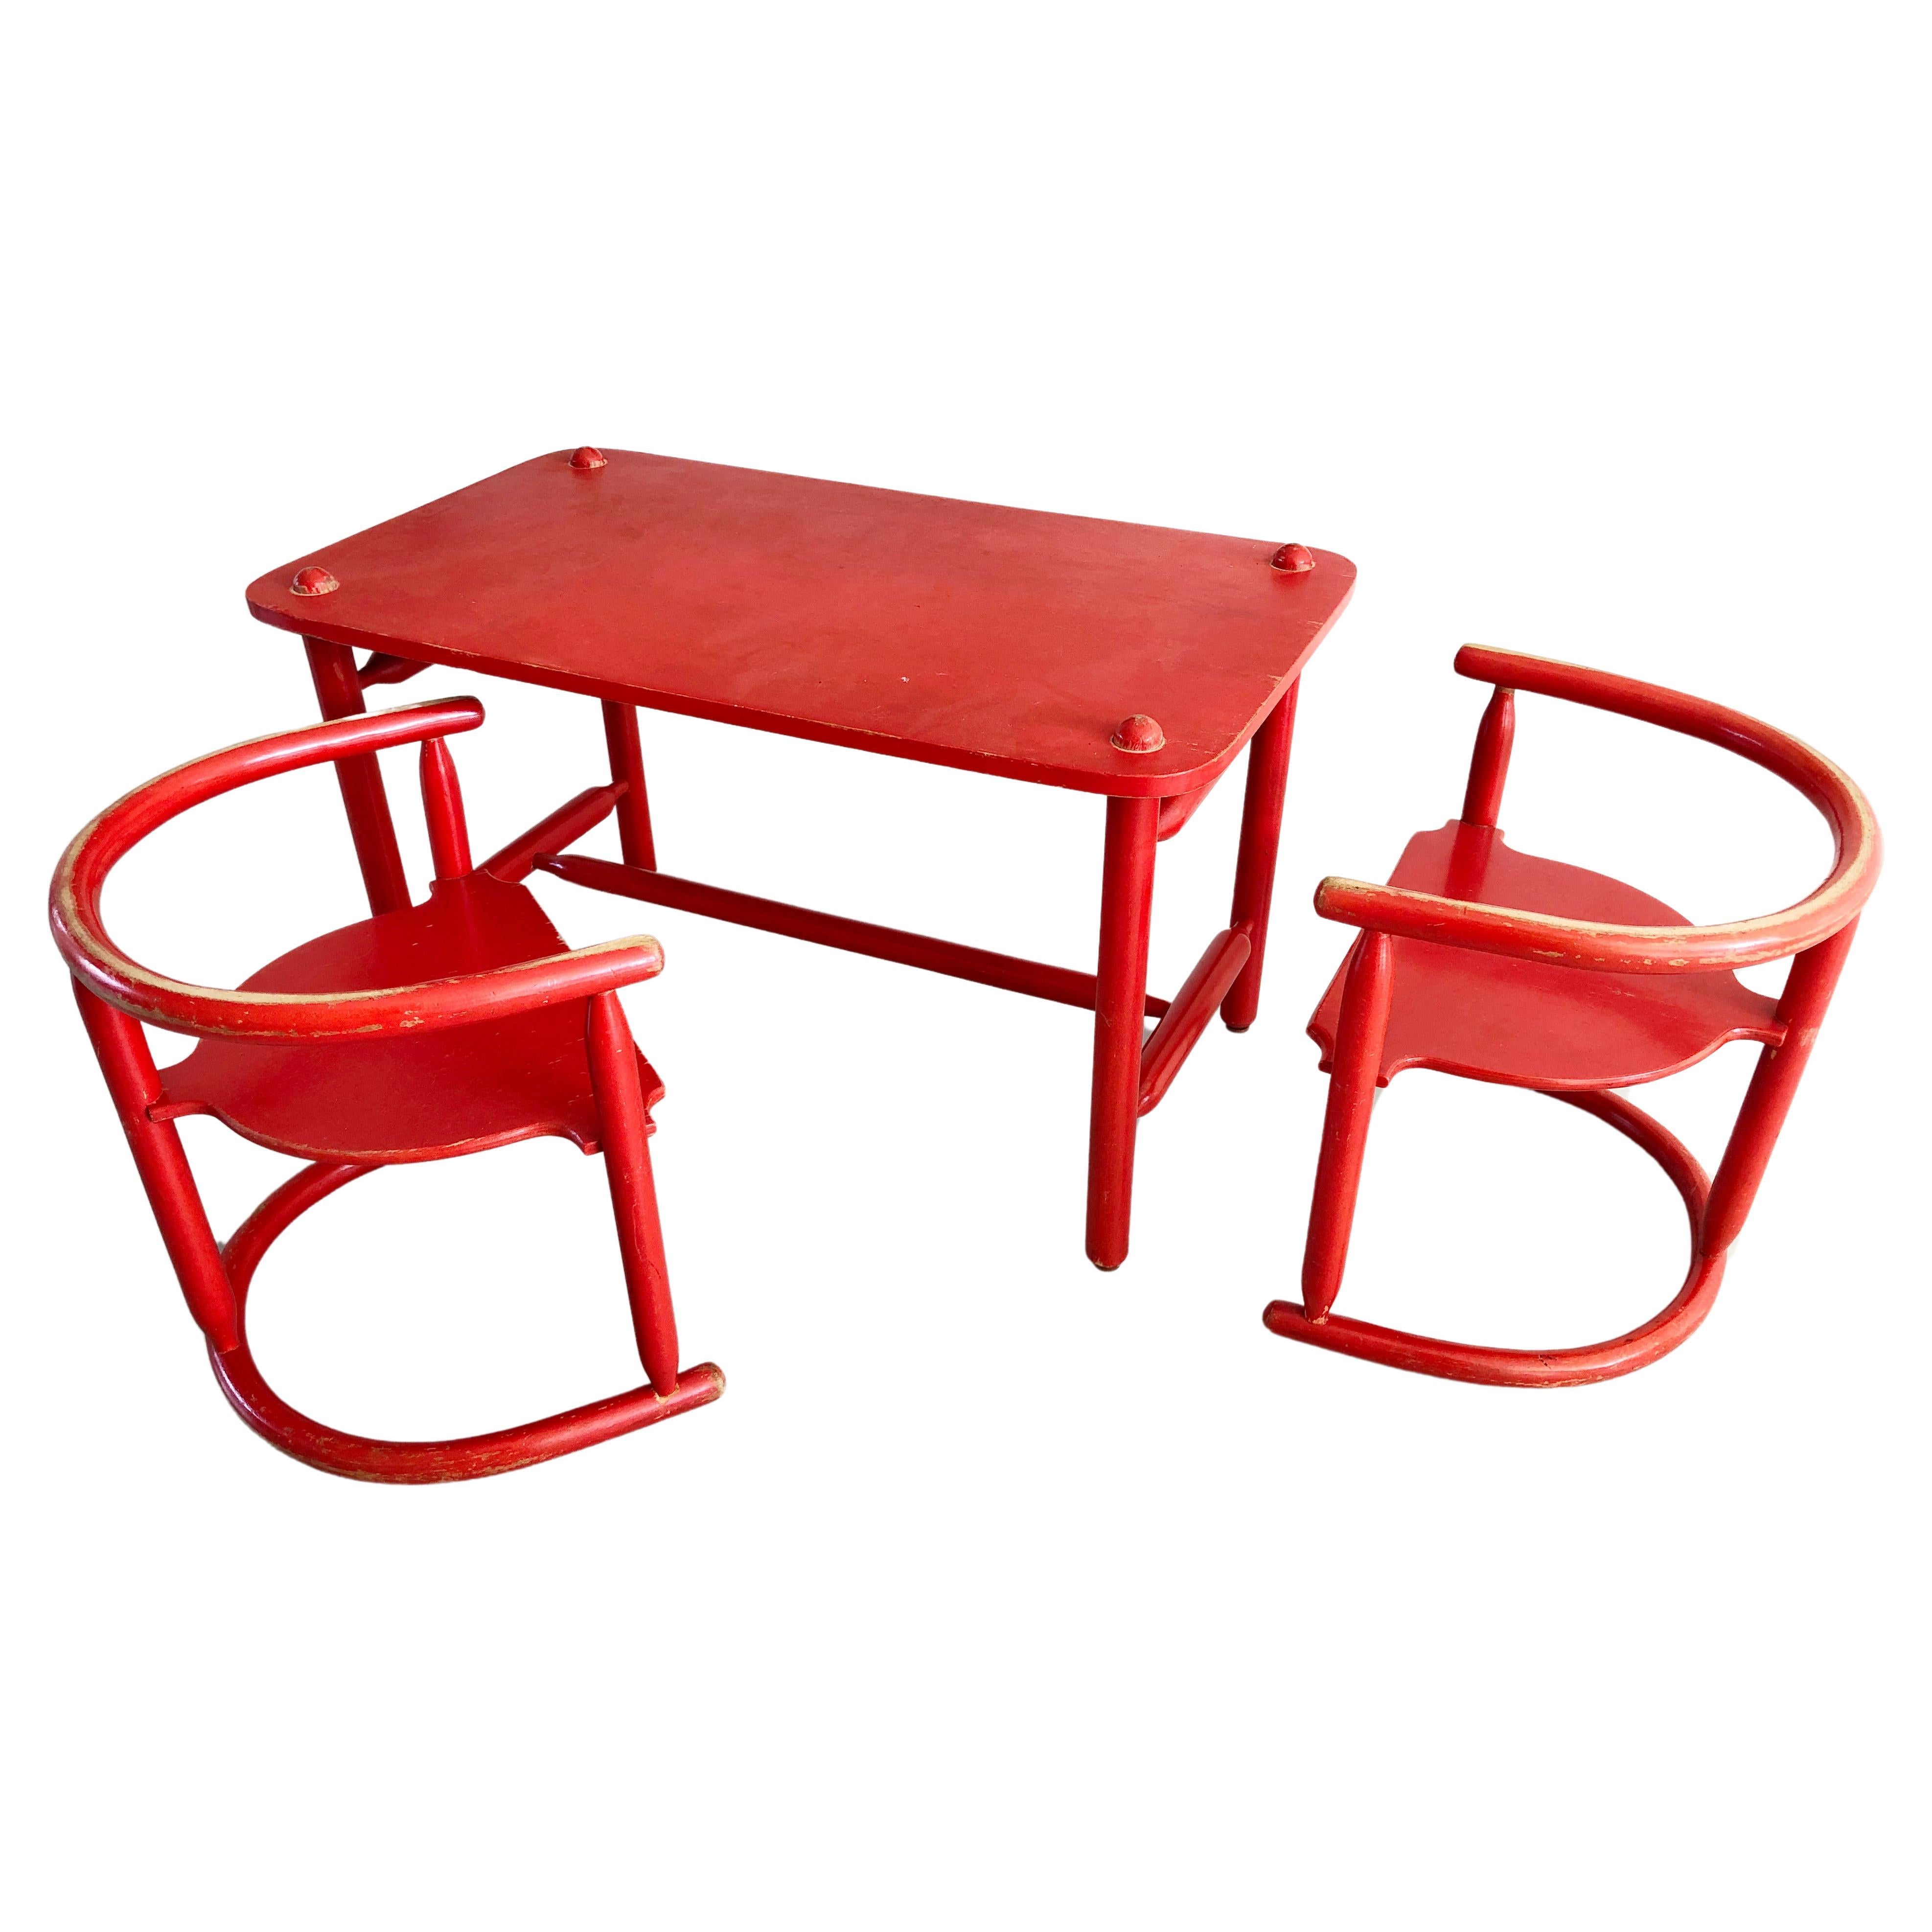 2 Chairs & Table set Anna - Karin Mobring for IKEA 1963 - Original paint For Sale